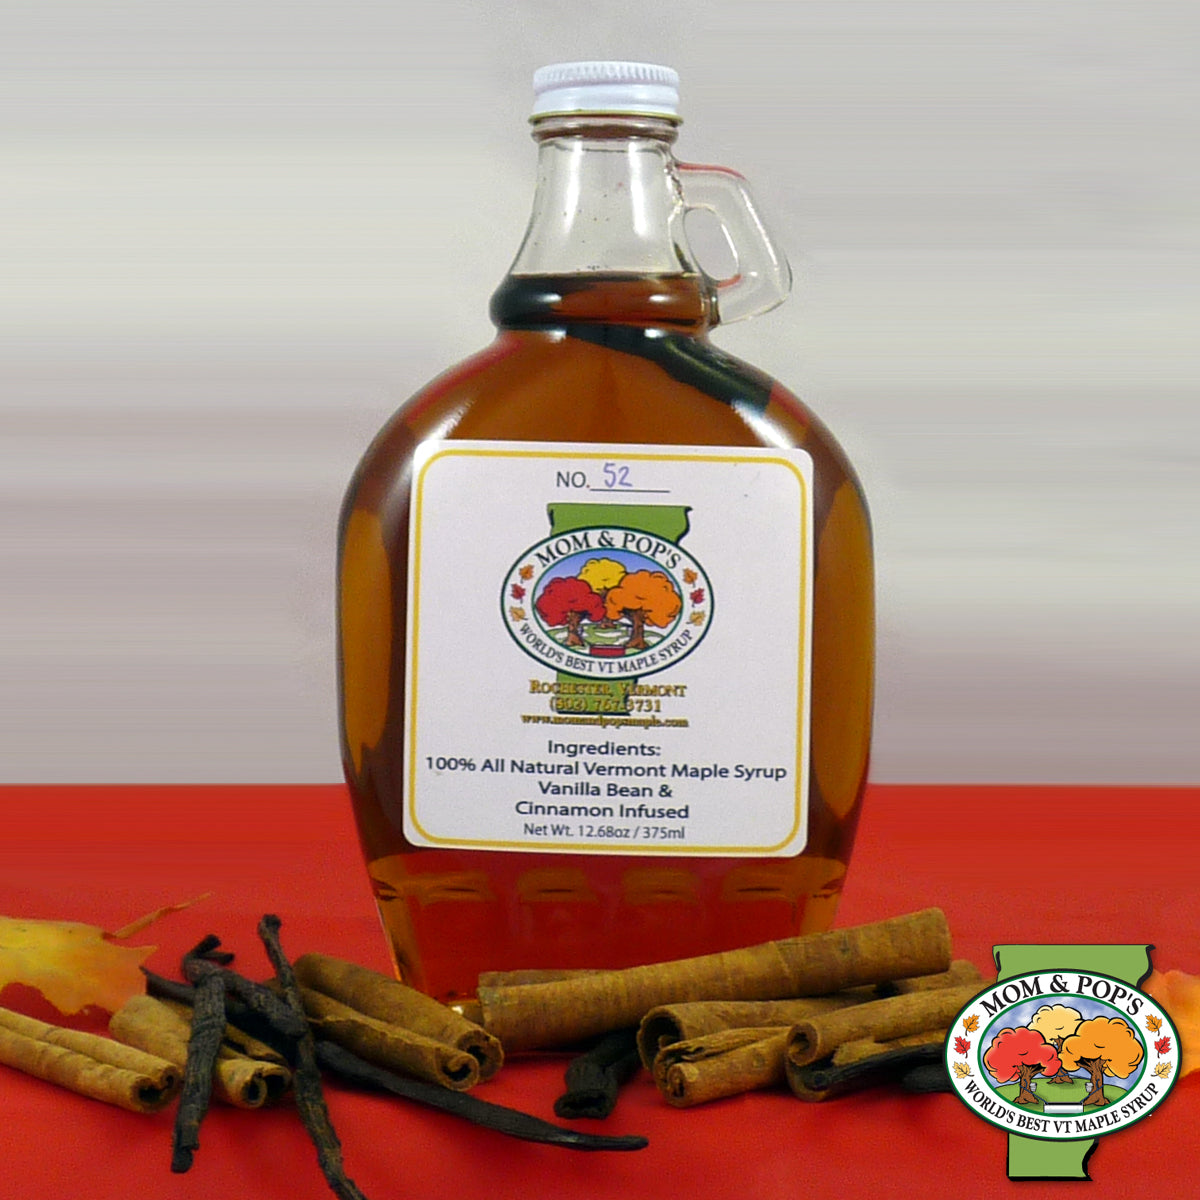 A bottle of Vanilla Bean and Cinnamon Infused Maple Syrup